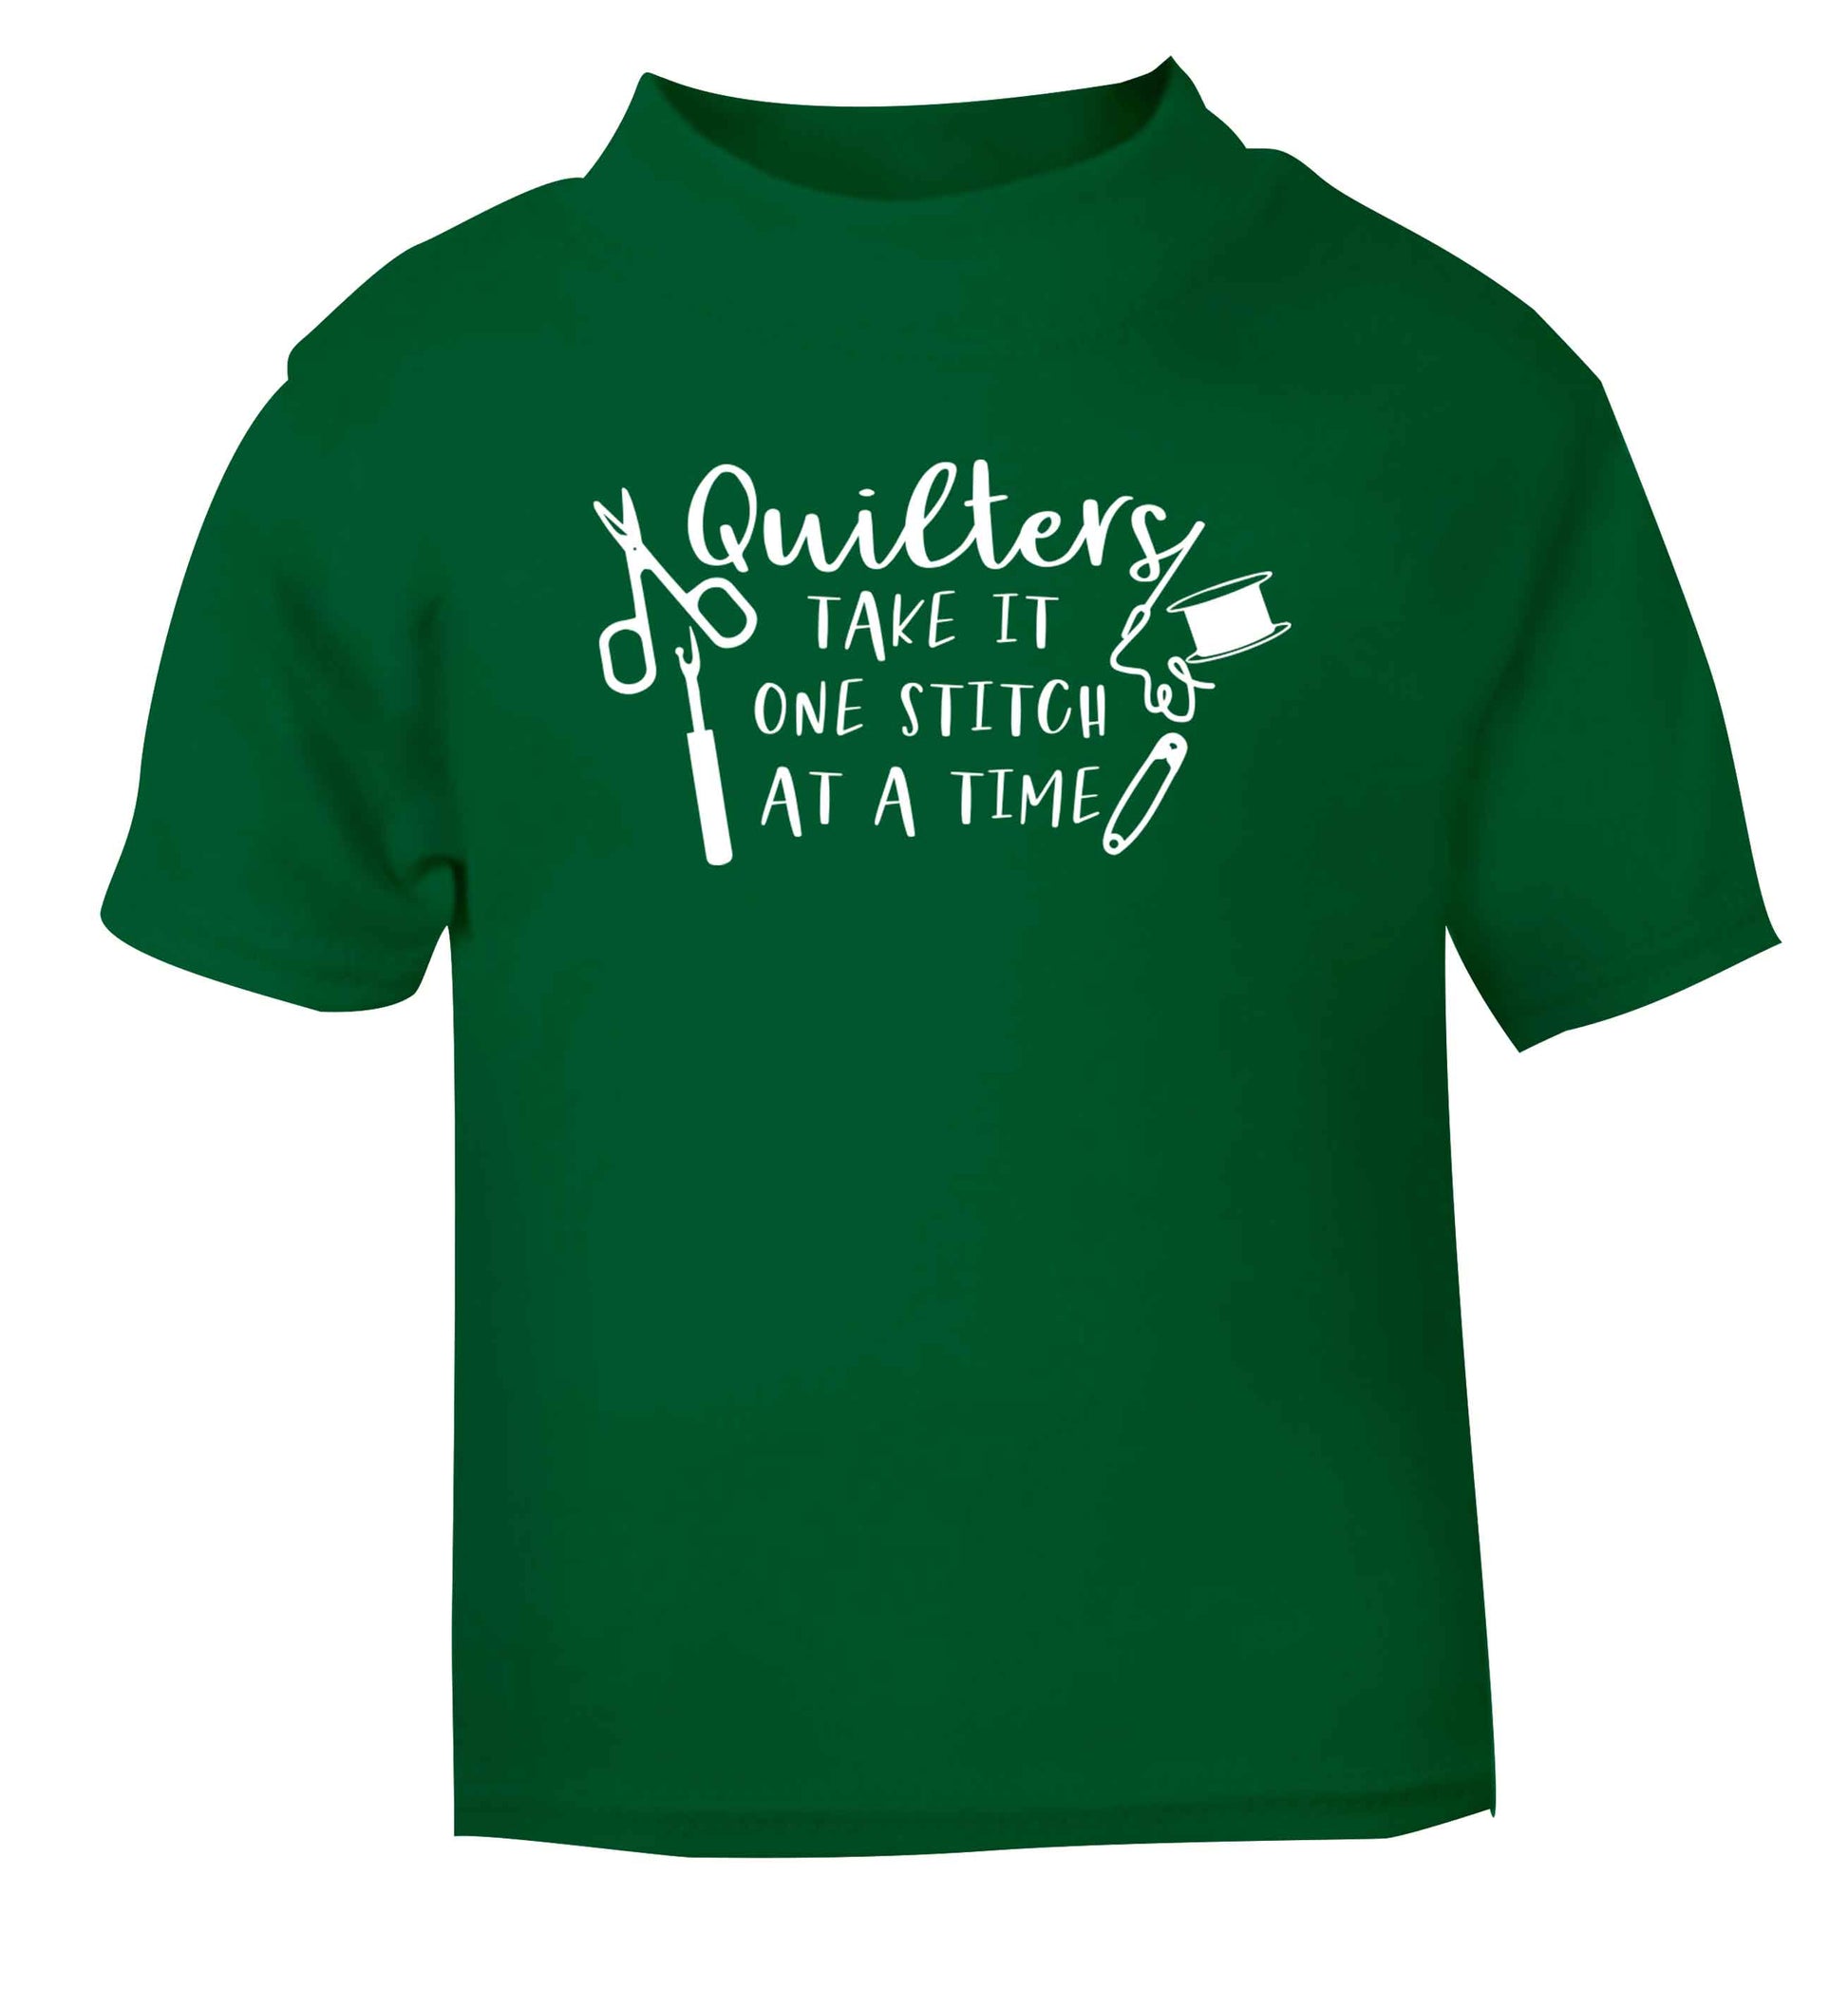 Quilters take it one stitch at a time  green Baby Toddler Tshirt 2 Years